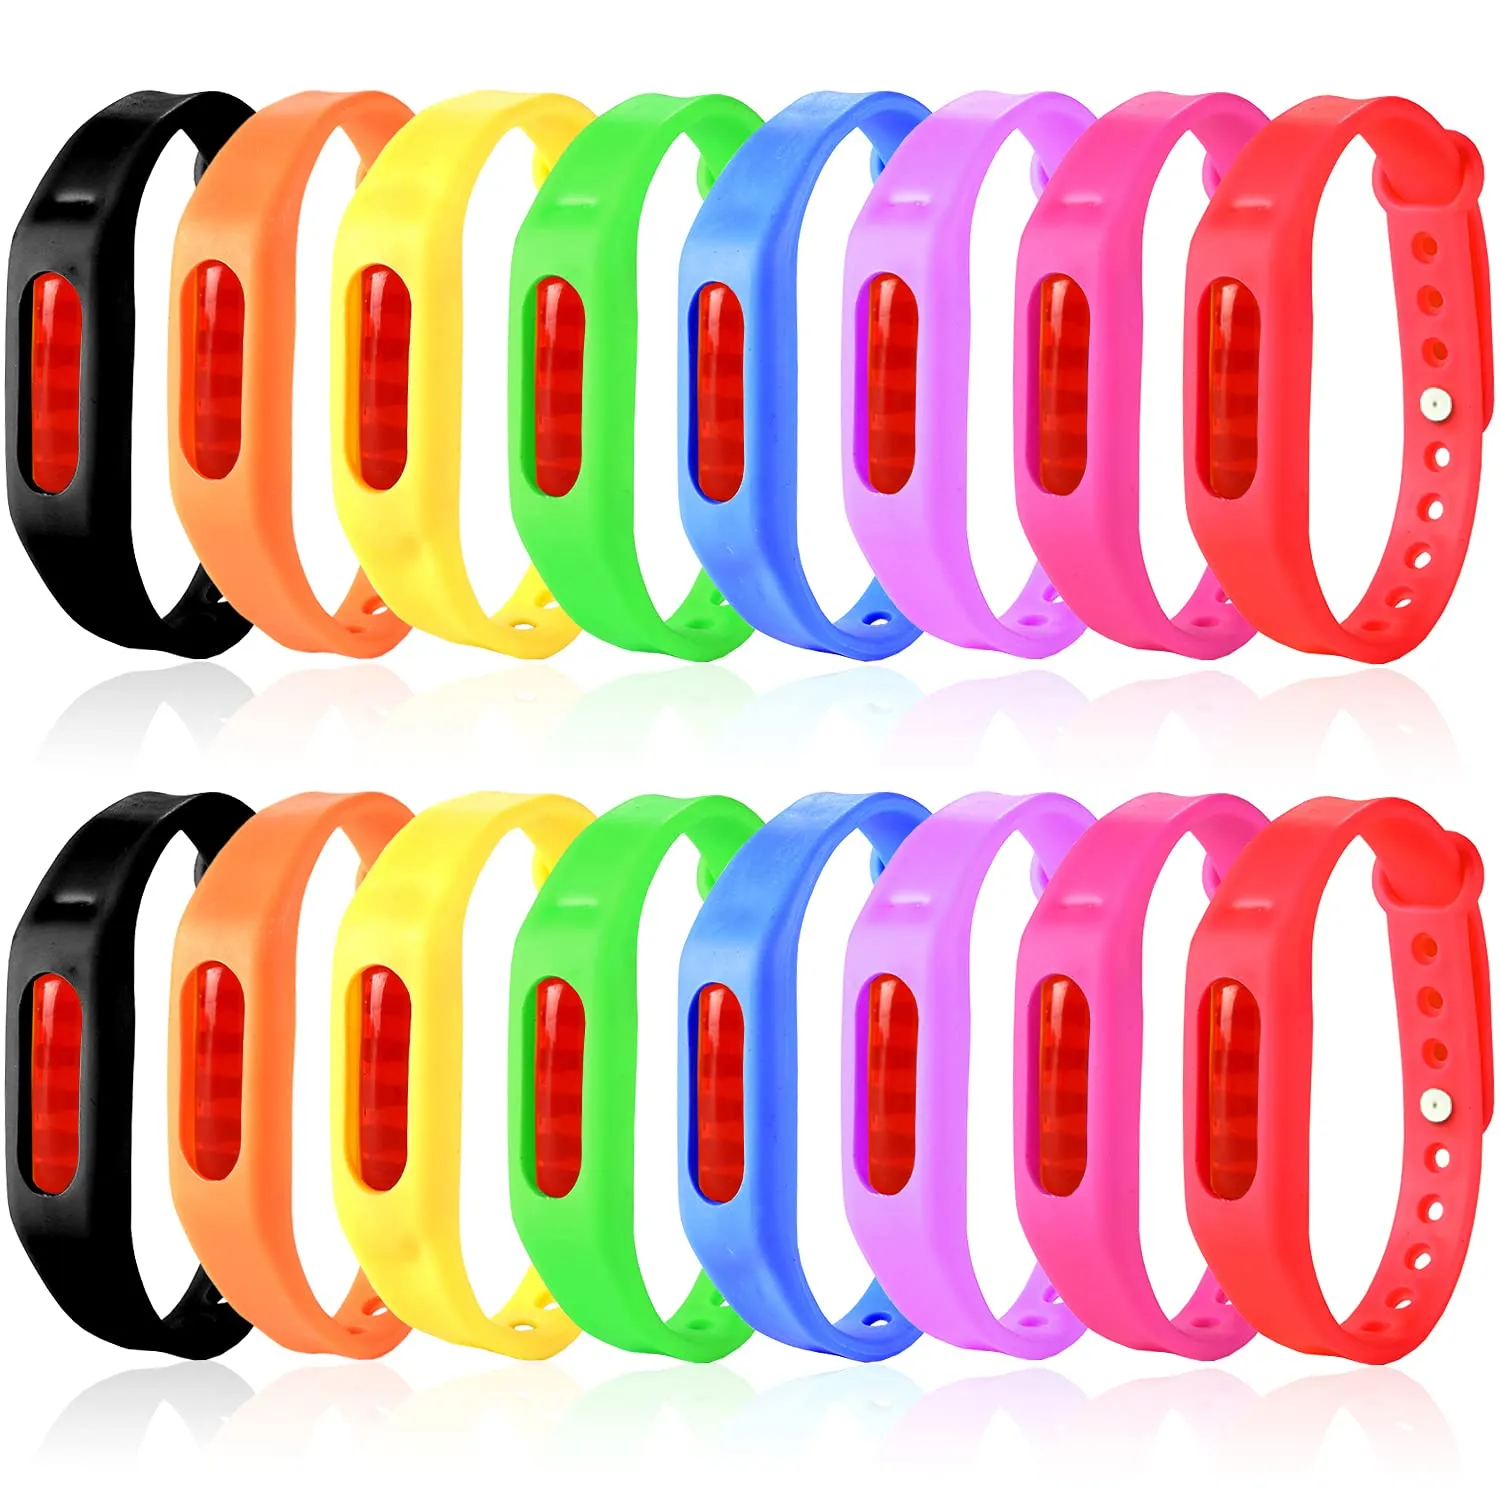 Ultrasonic Mosquito Repellent Bracelet Usb Rechargeable Anti Mosquito  Repeller Wristband | Fruugo KR